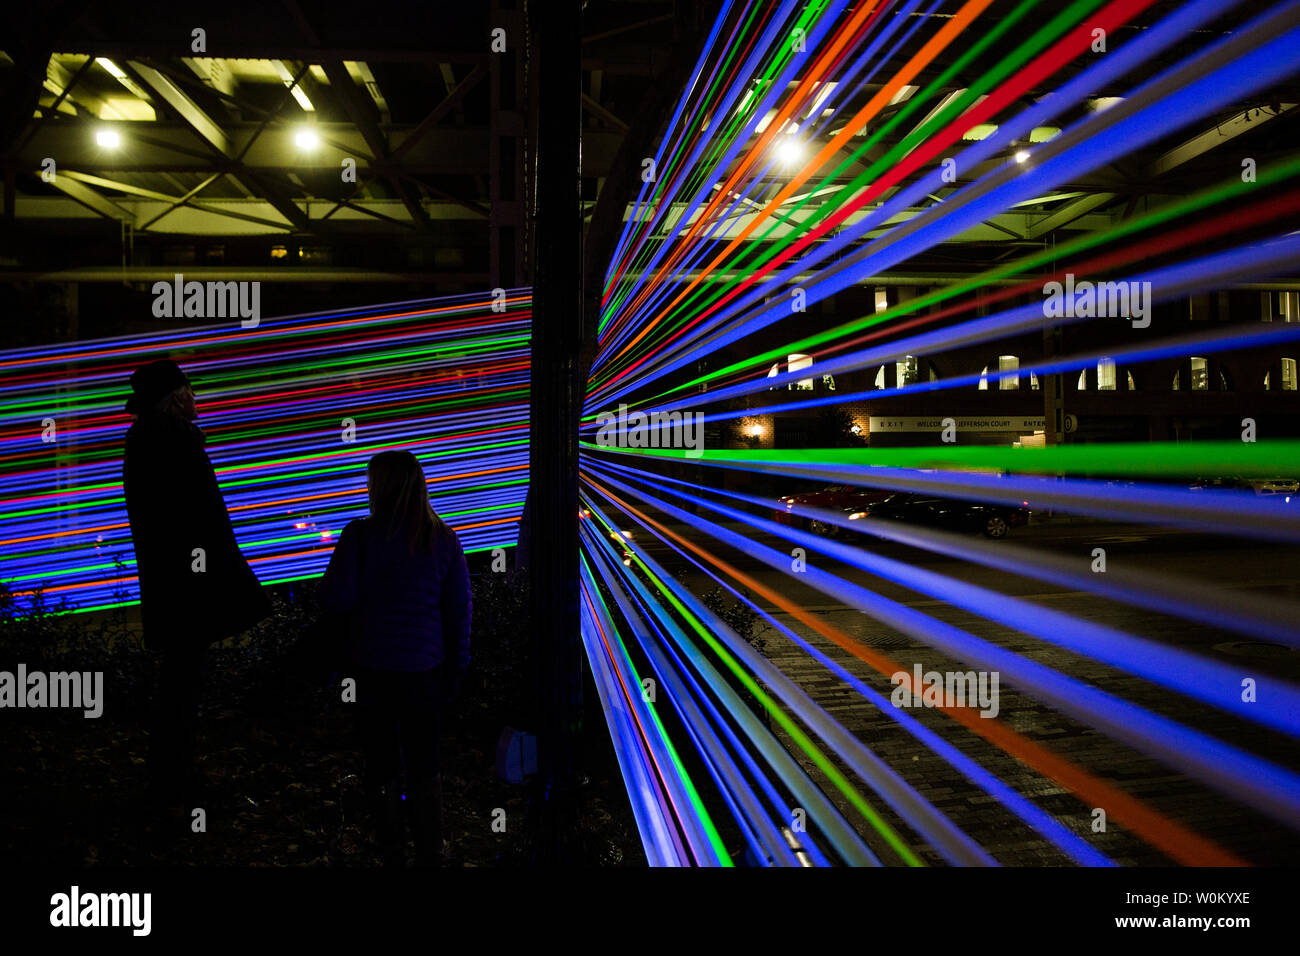 People view 'Horizontal Interface' an installation made up of stretched UV tape which is part of Georgetown GLOW in Georgetown in Washington, DC on December 9, 2017. GLOW is an annual outdoor public light exhibit put together by the Georgetown Business Improvement District.     Photo by Erin Schaff/UPI Stock Photo